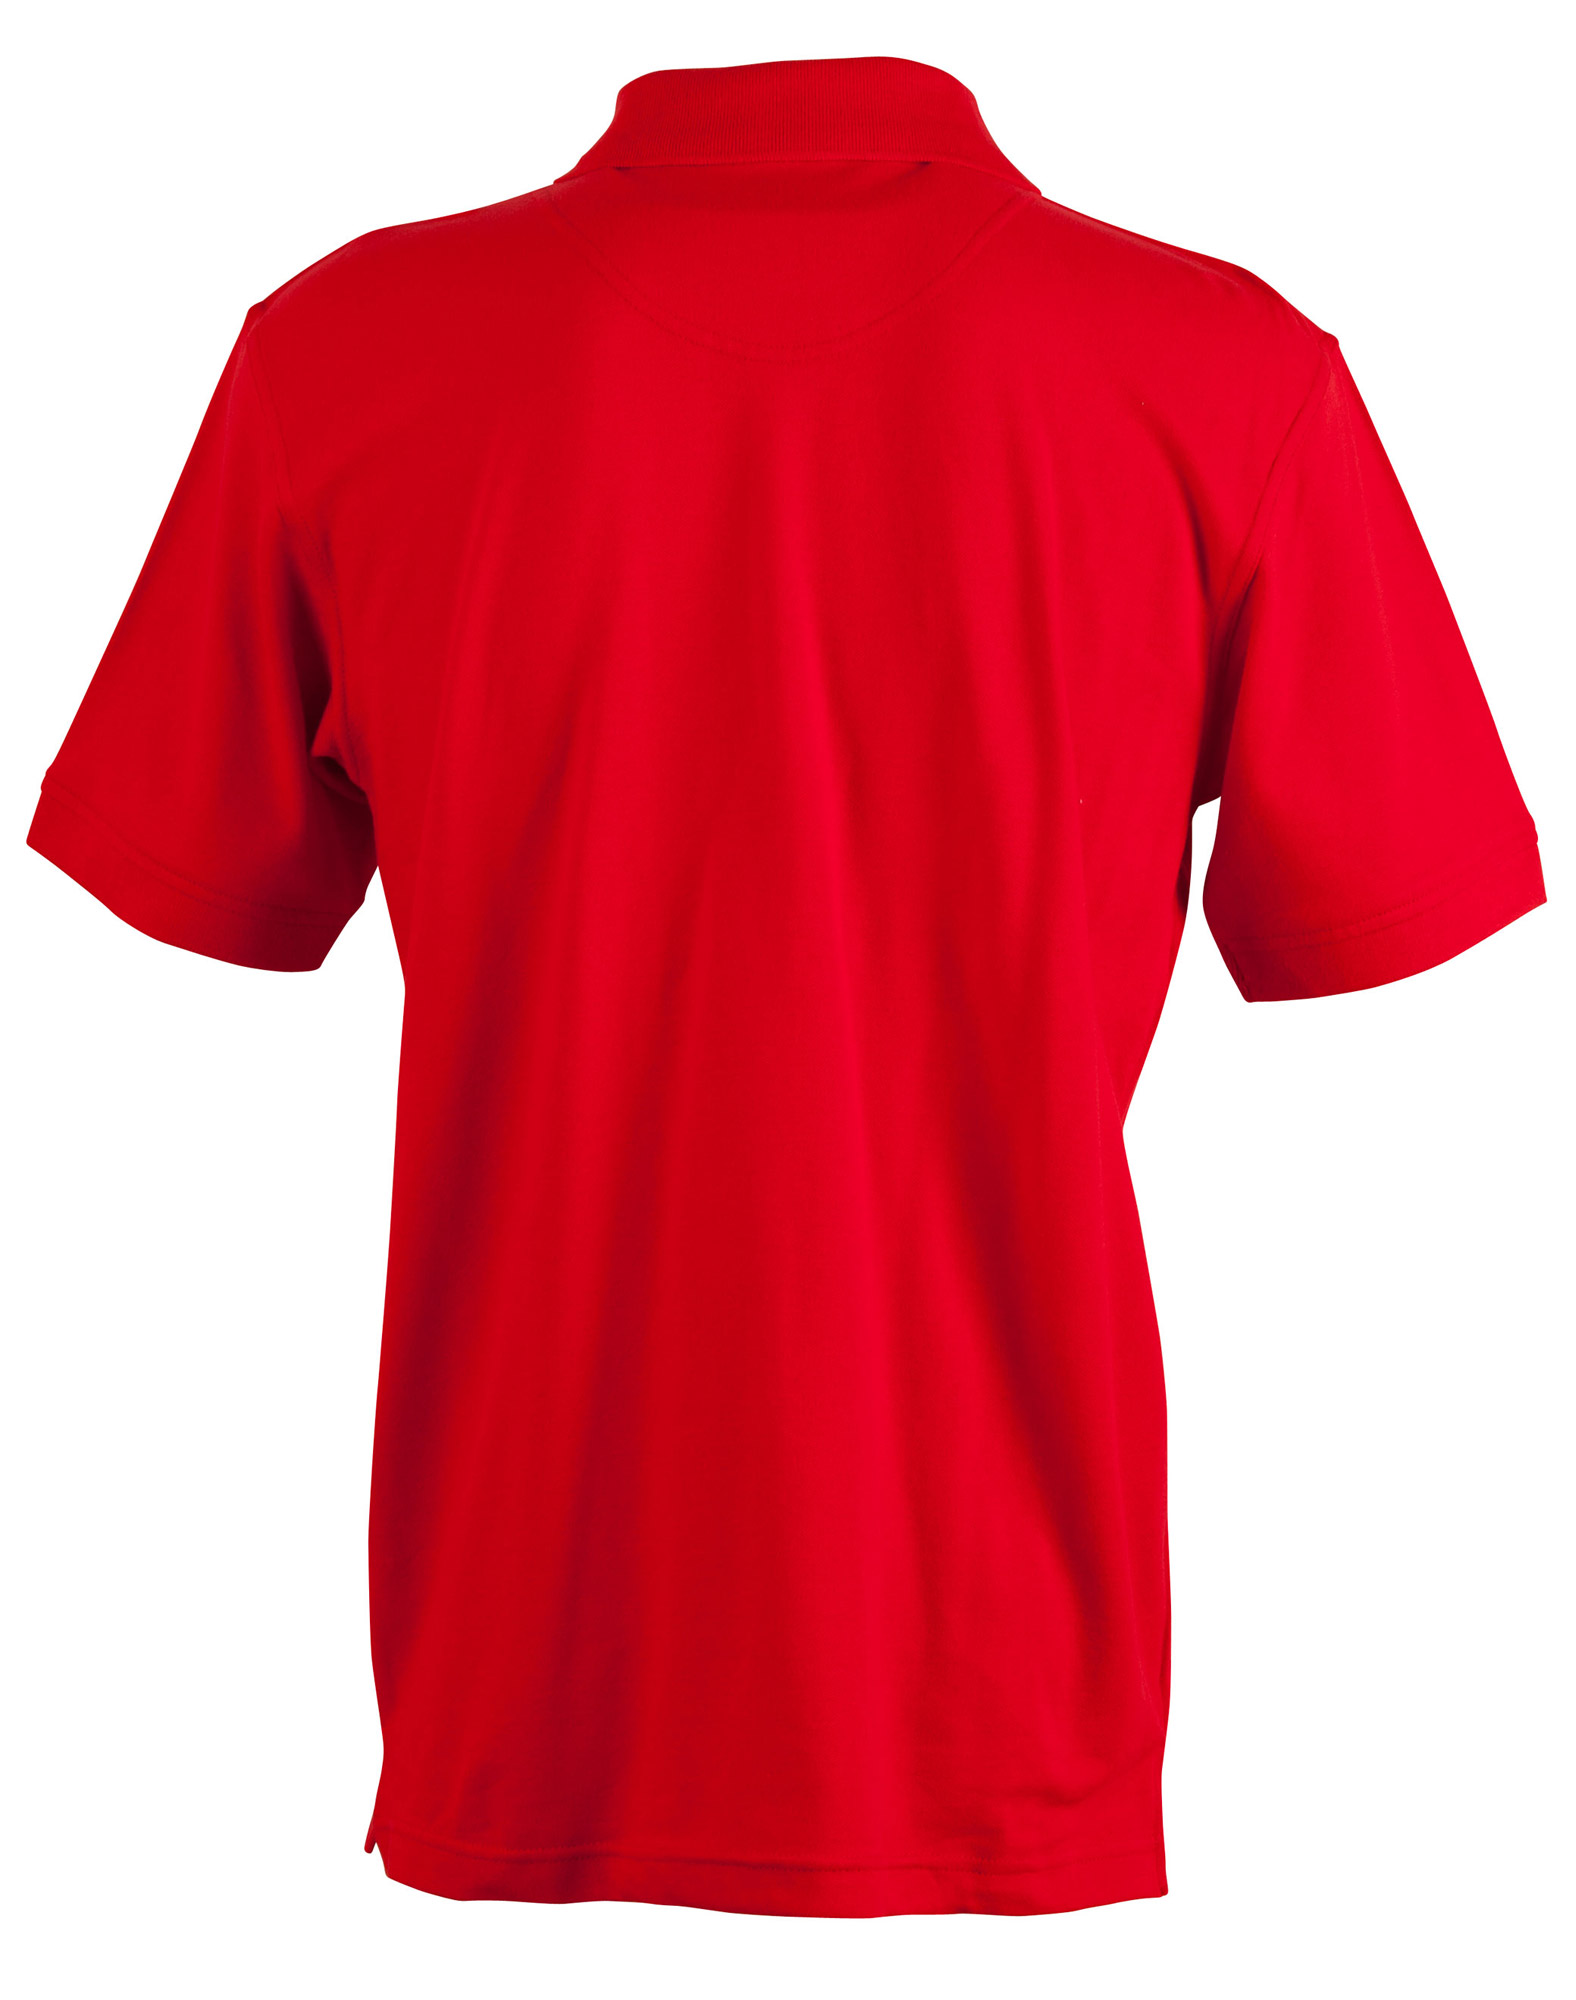 Custom Mens Red Darling Harbour Cotton Stretch Polo Shirts Online Perth Australia